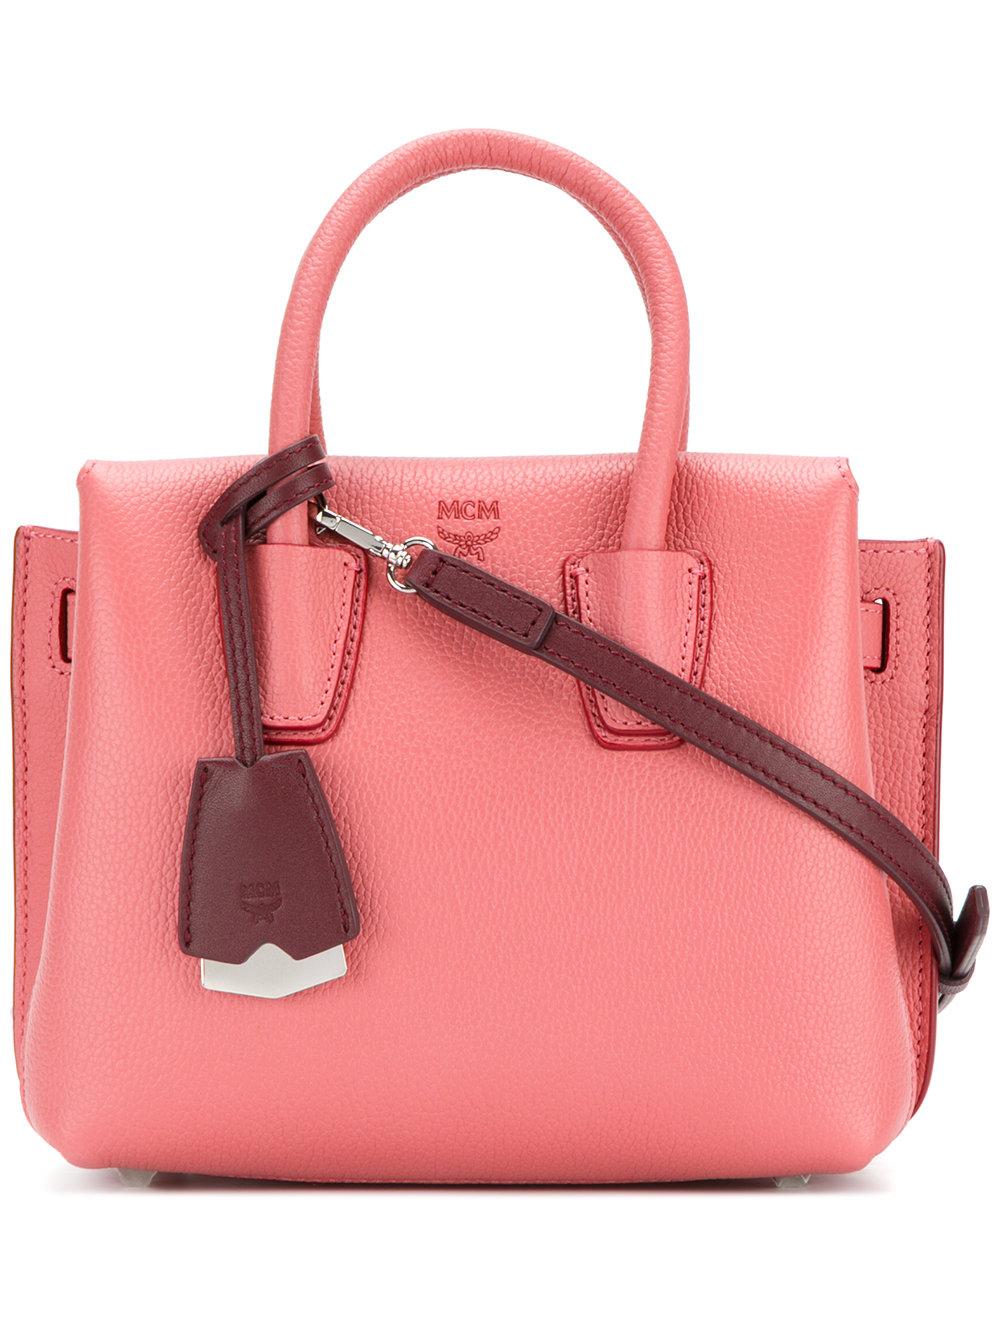 Lyst - Mcm Milla Tote in Pink